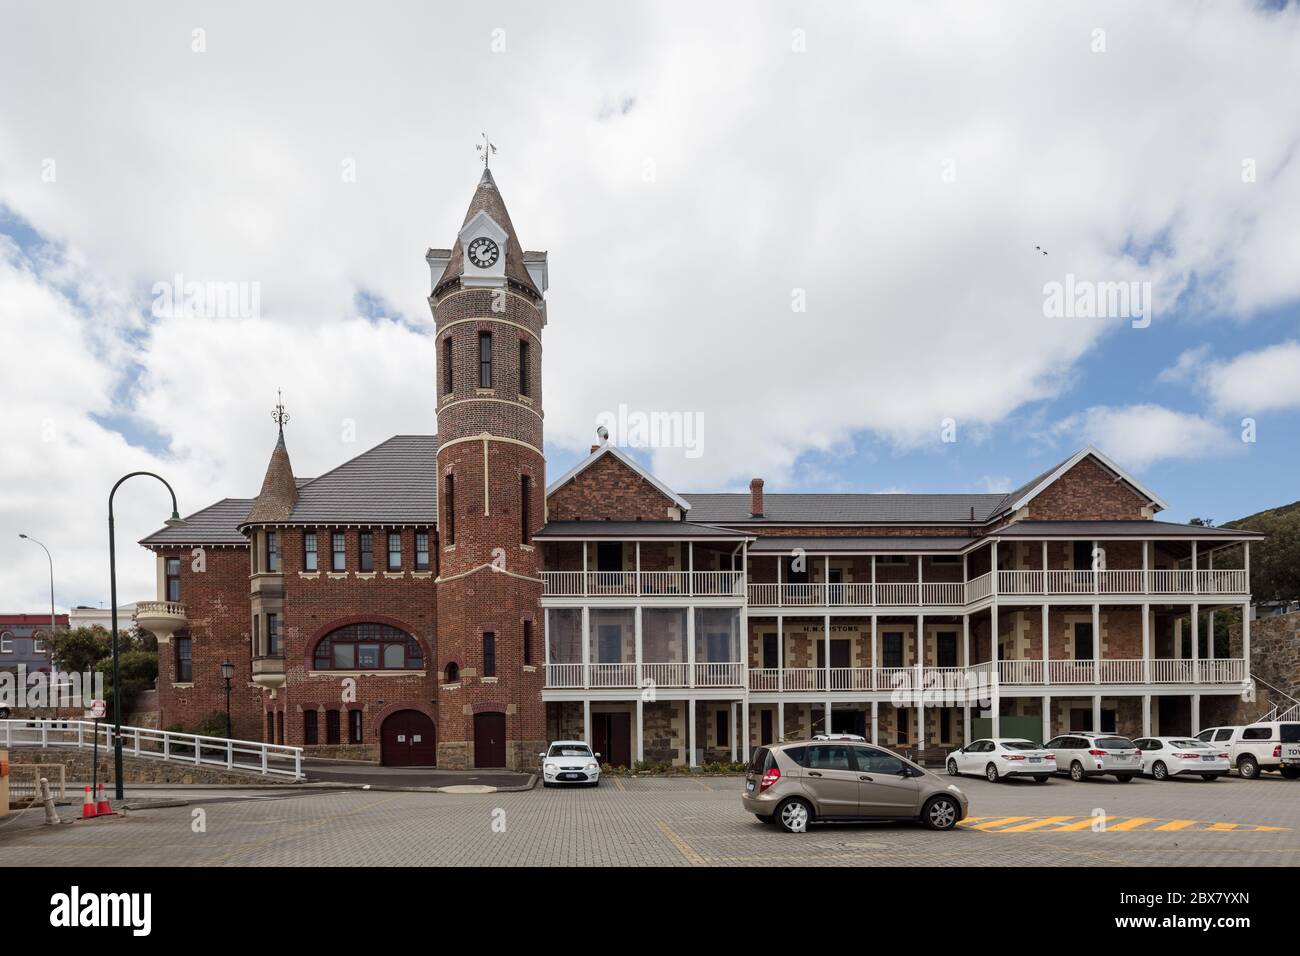 Albany Western Australia November 10th 2019 : The old post office building in Albany, which now houses part of the University of Western Australia cam Stock Photo